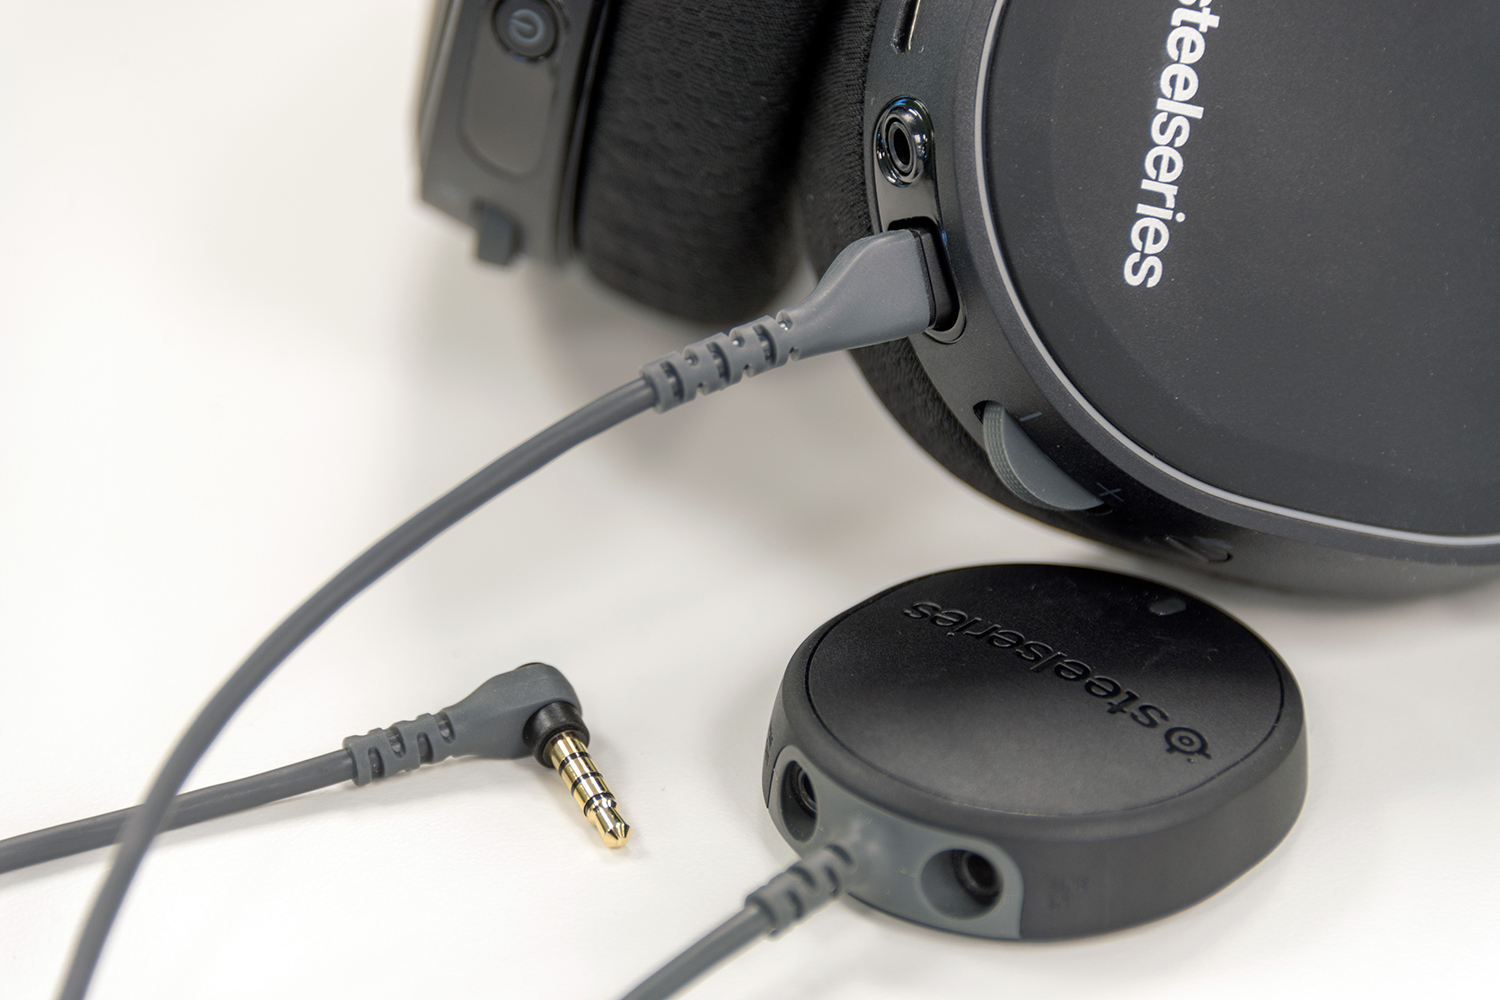 Auriculares Steelseries Arctis 7 - Review